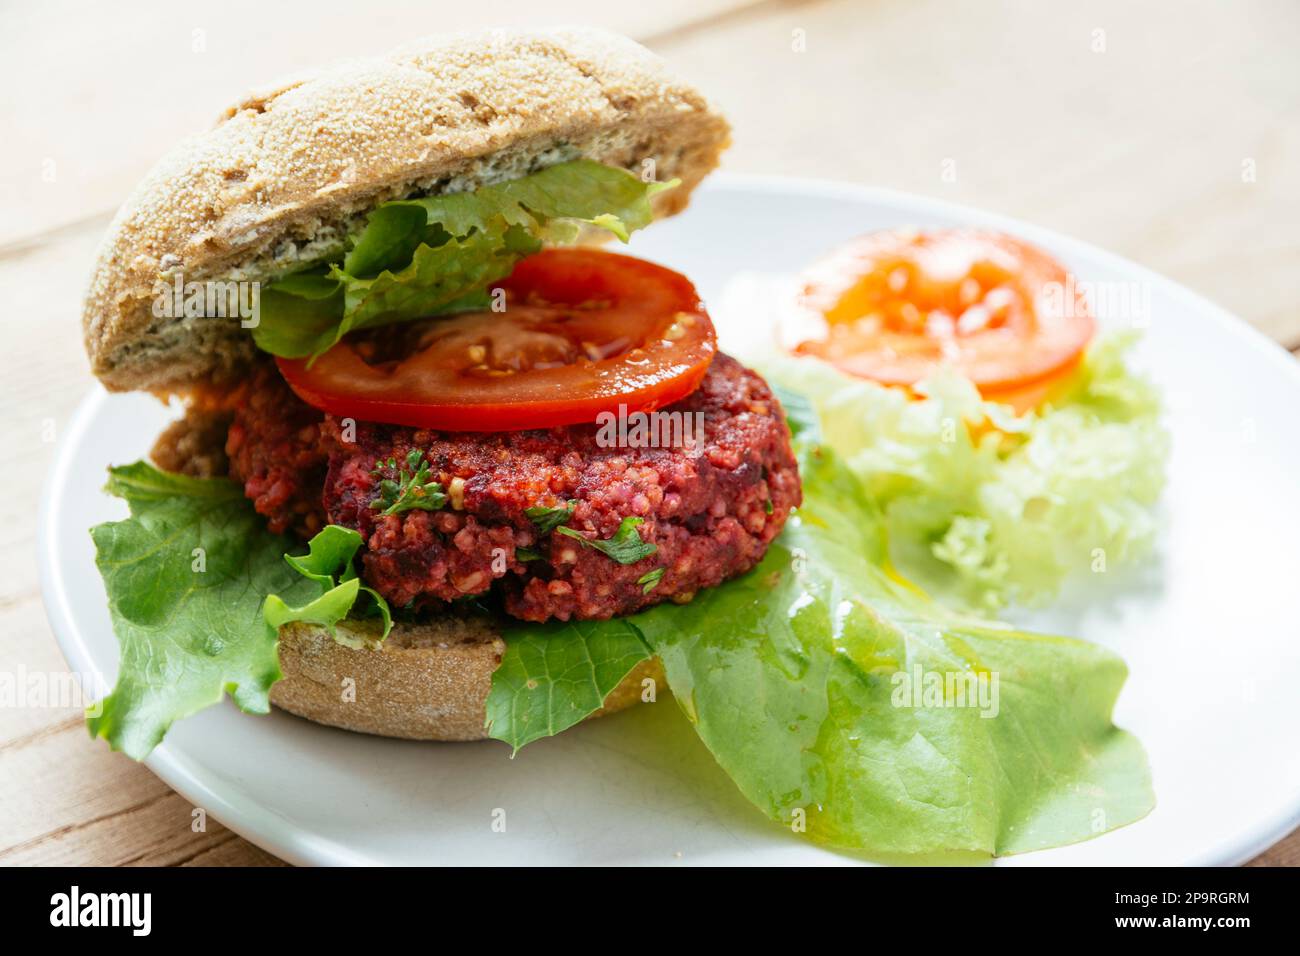 Vegan burger on a bun, made from beetroot, quinoa and lentils and raw oats as main ingredients. Stock Photo